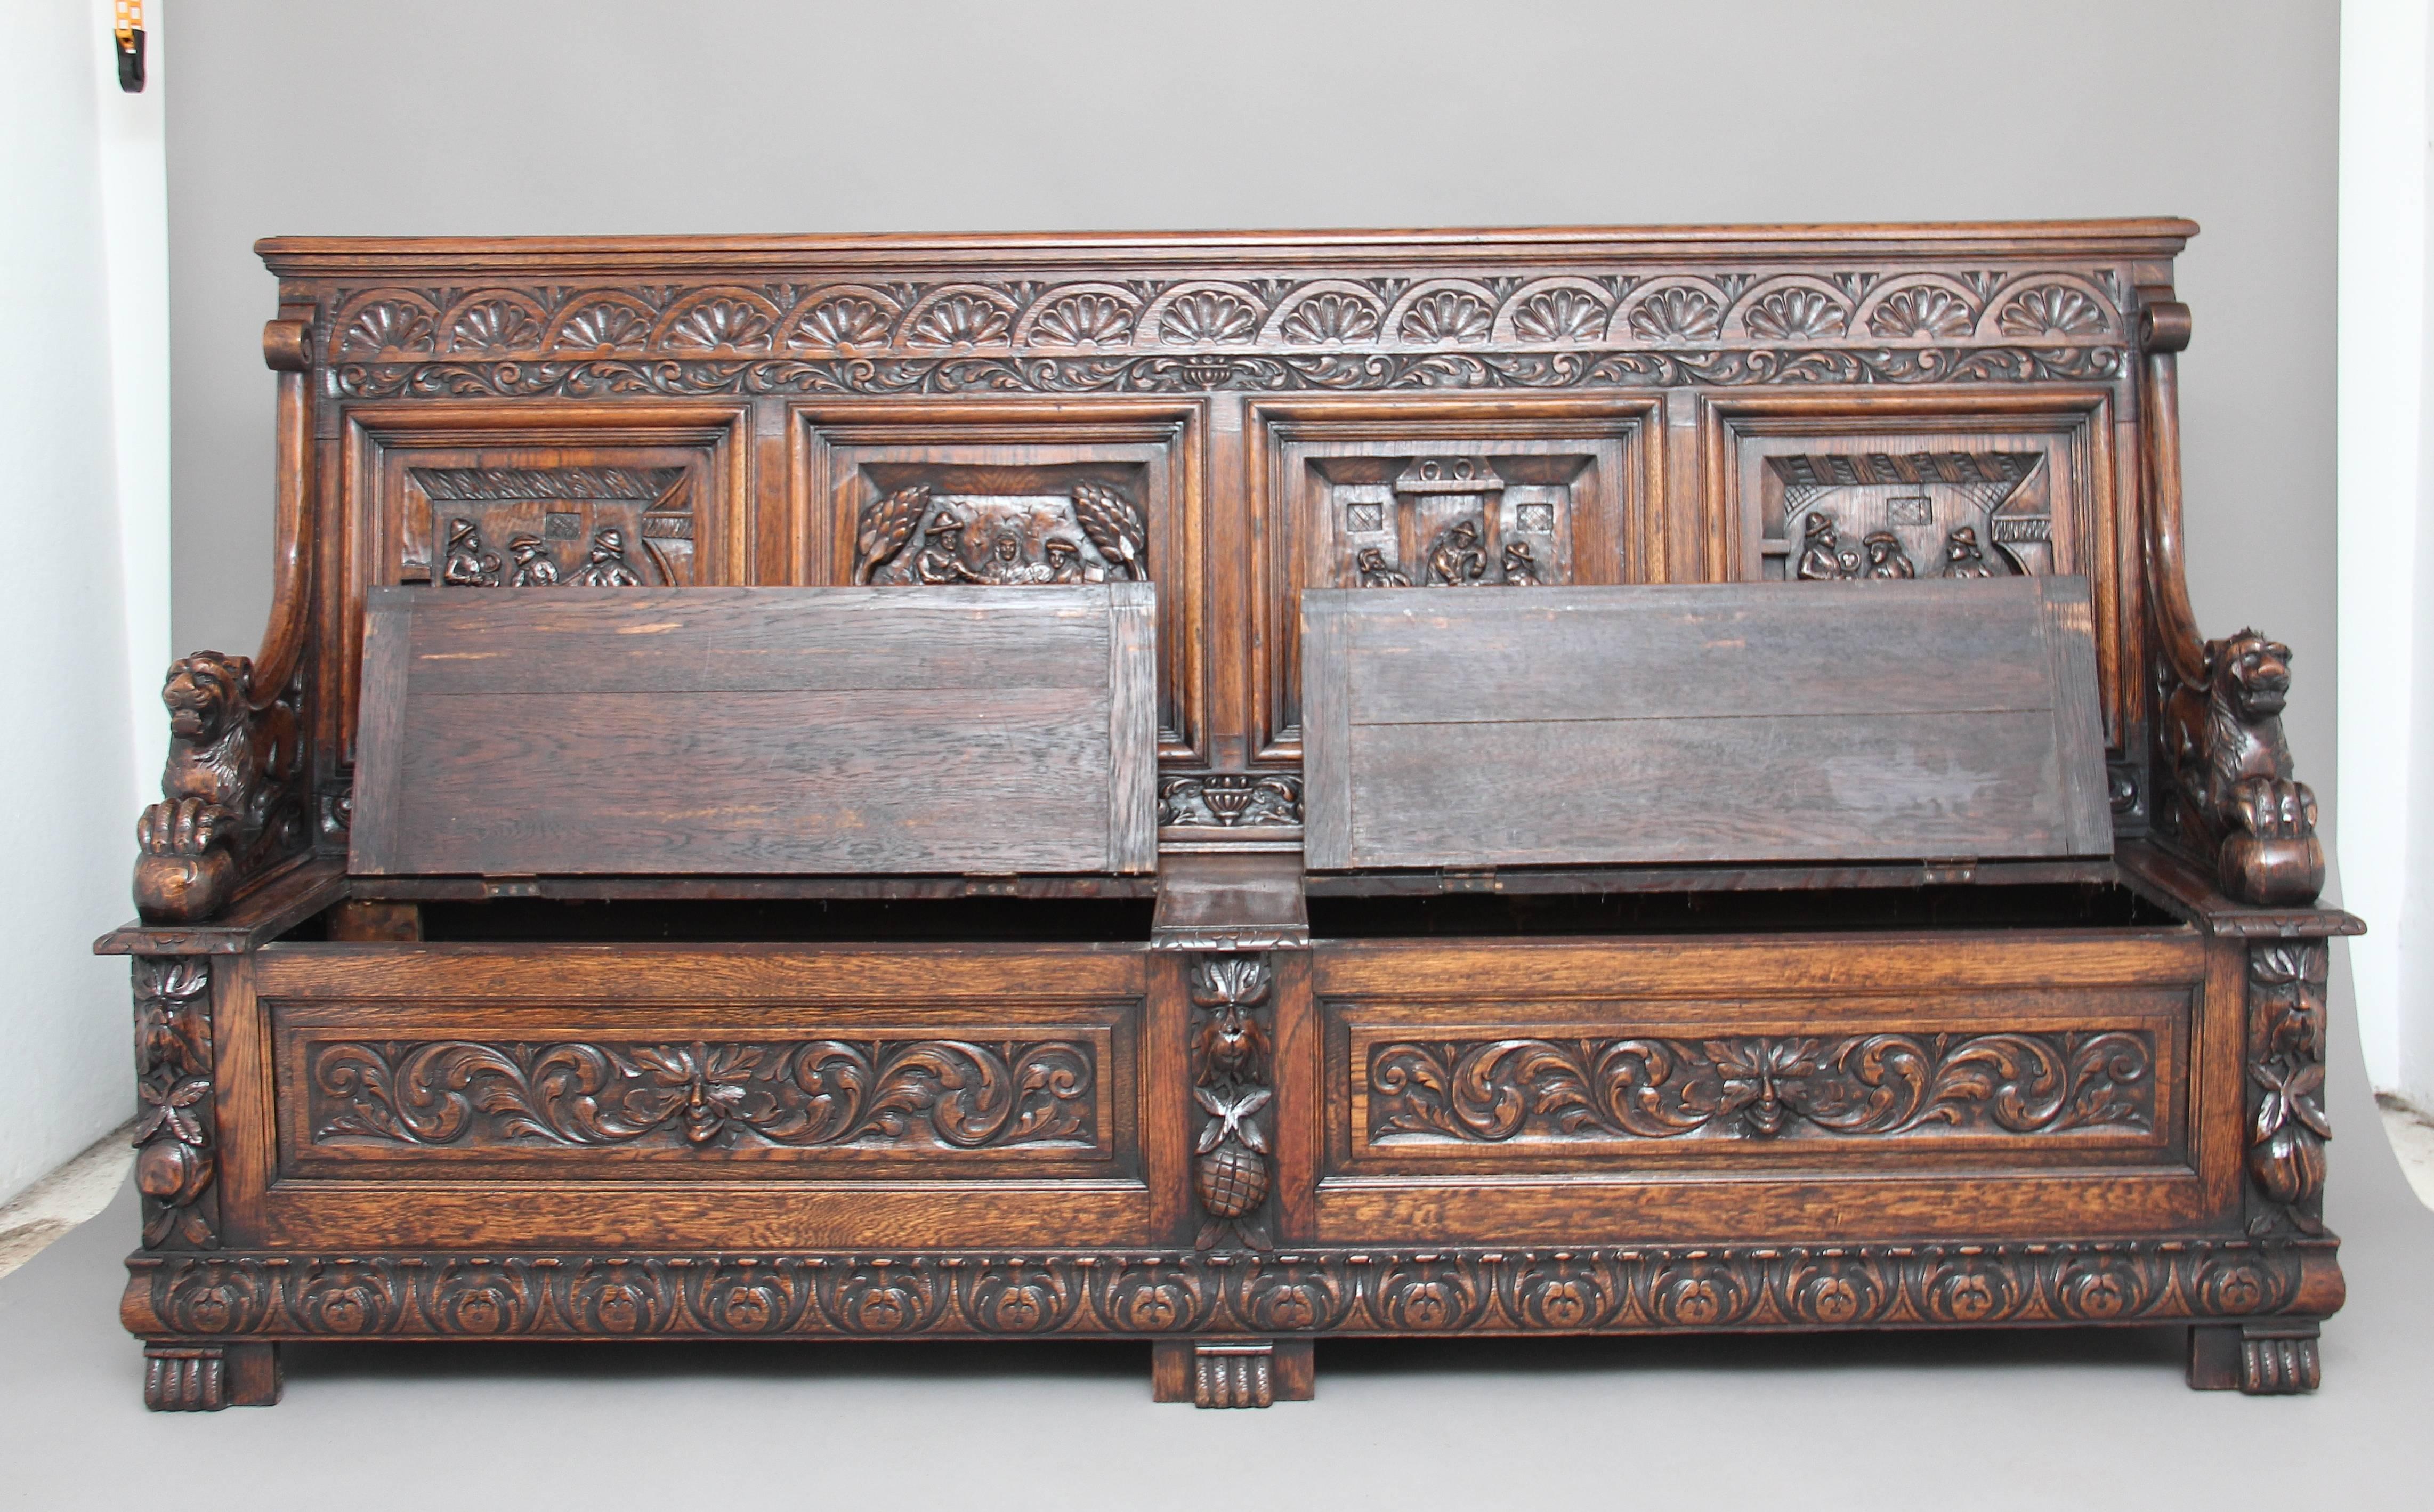 A superb quality large 19th century Flemish oak box settle that is very well carved, the back having four carved panels depicting tavern scenes, the arms carved with lions with their front paws on a ball, the seat with two lift up lids to reveal